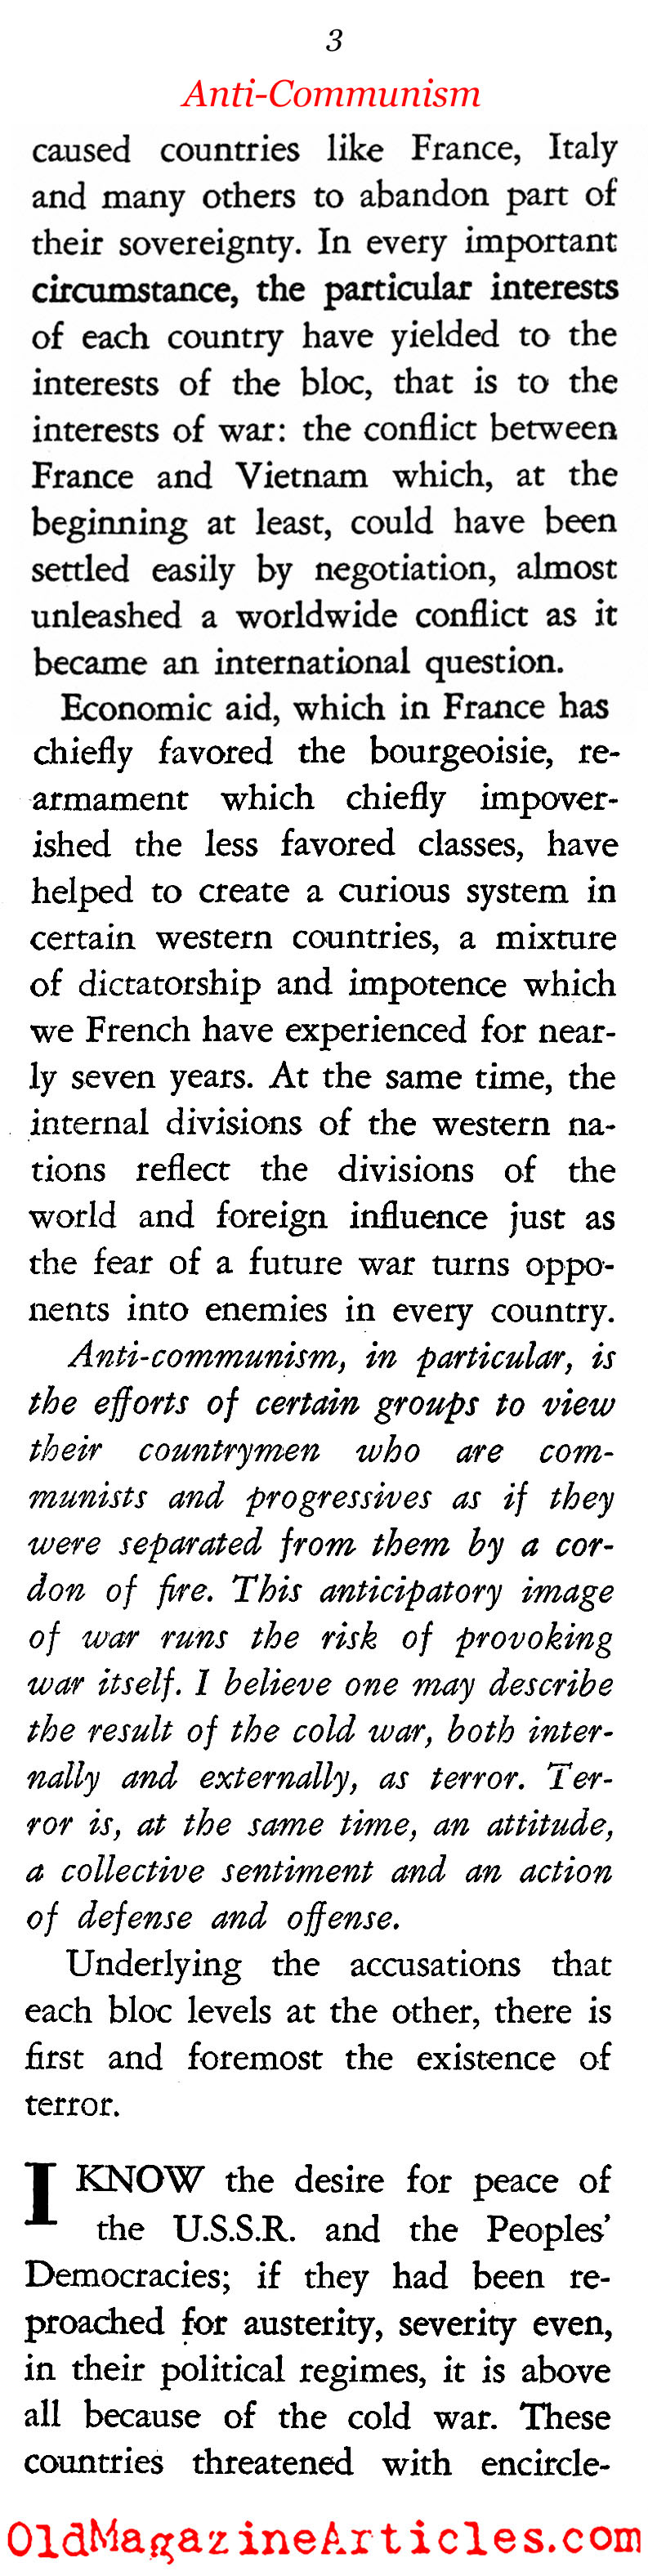 Jean-Paul Sartre on the Cold War (Masses & Mainstream, 1955)